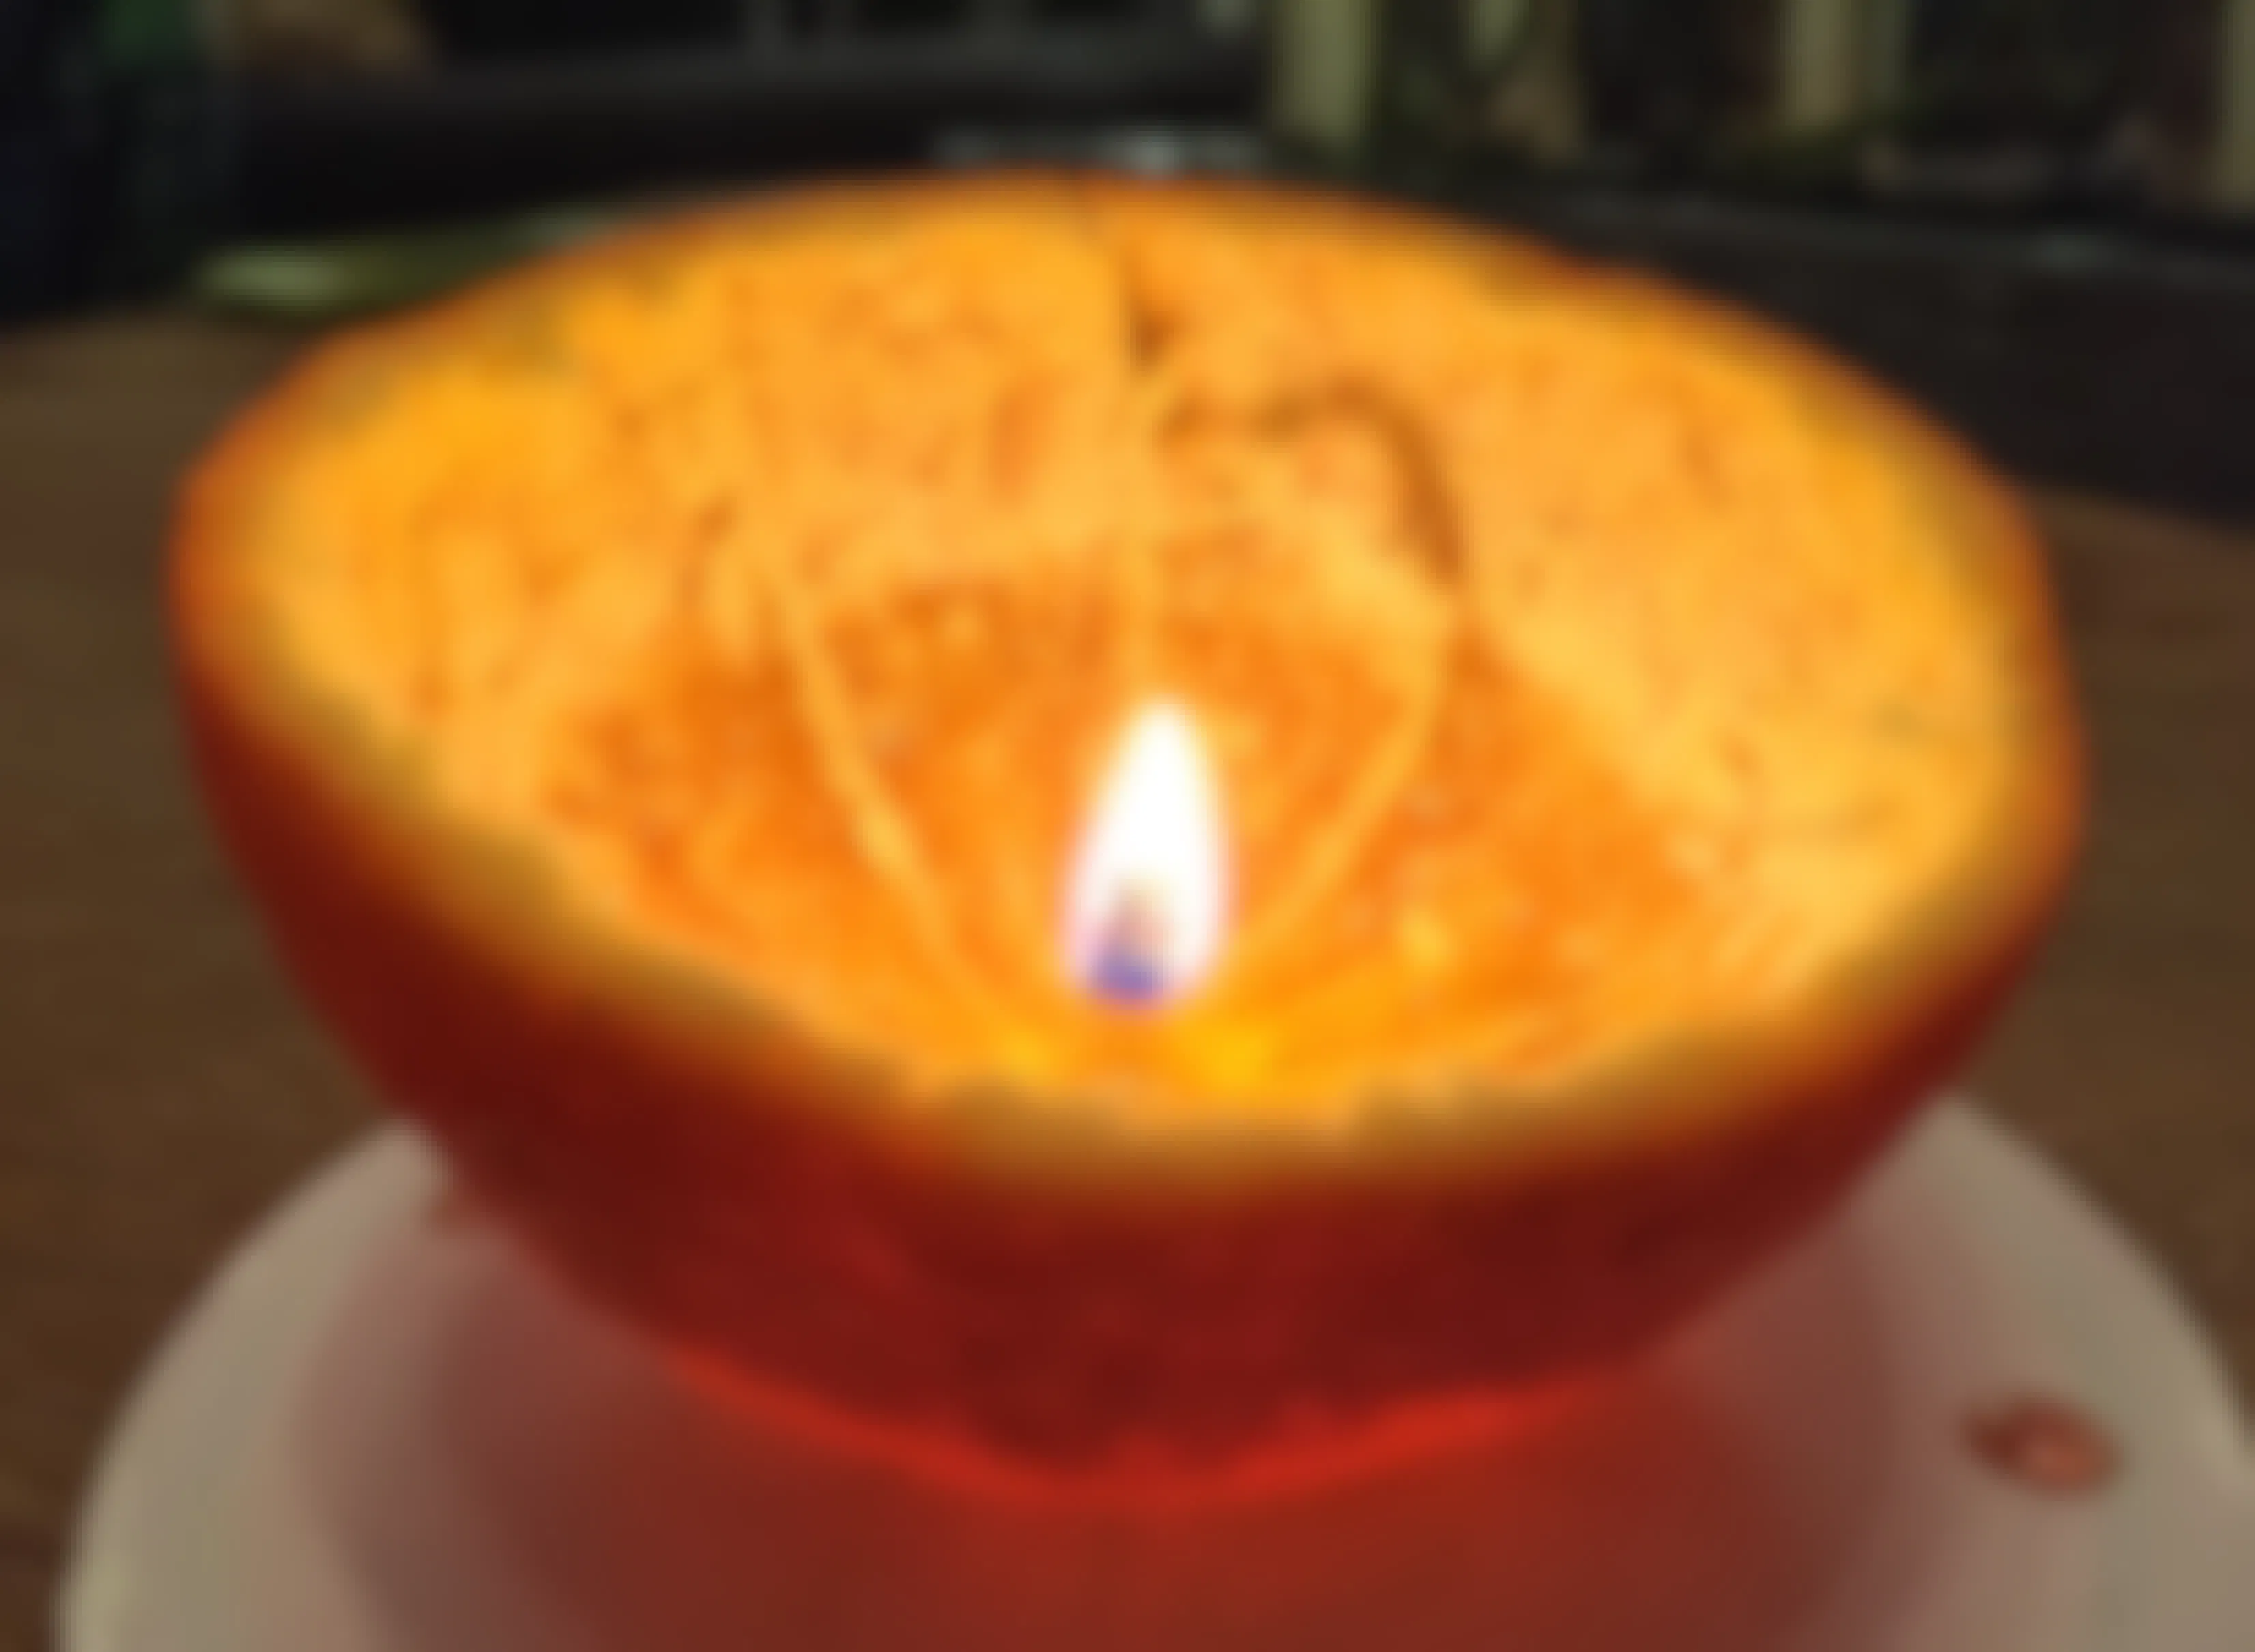 An orange peel turned into a candle with the inner stem as the wick